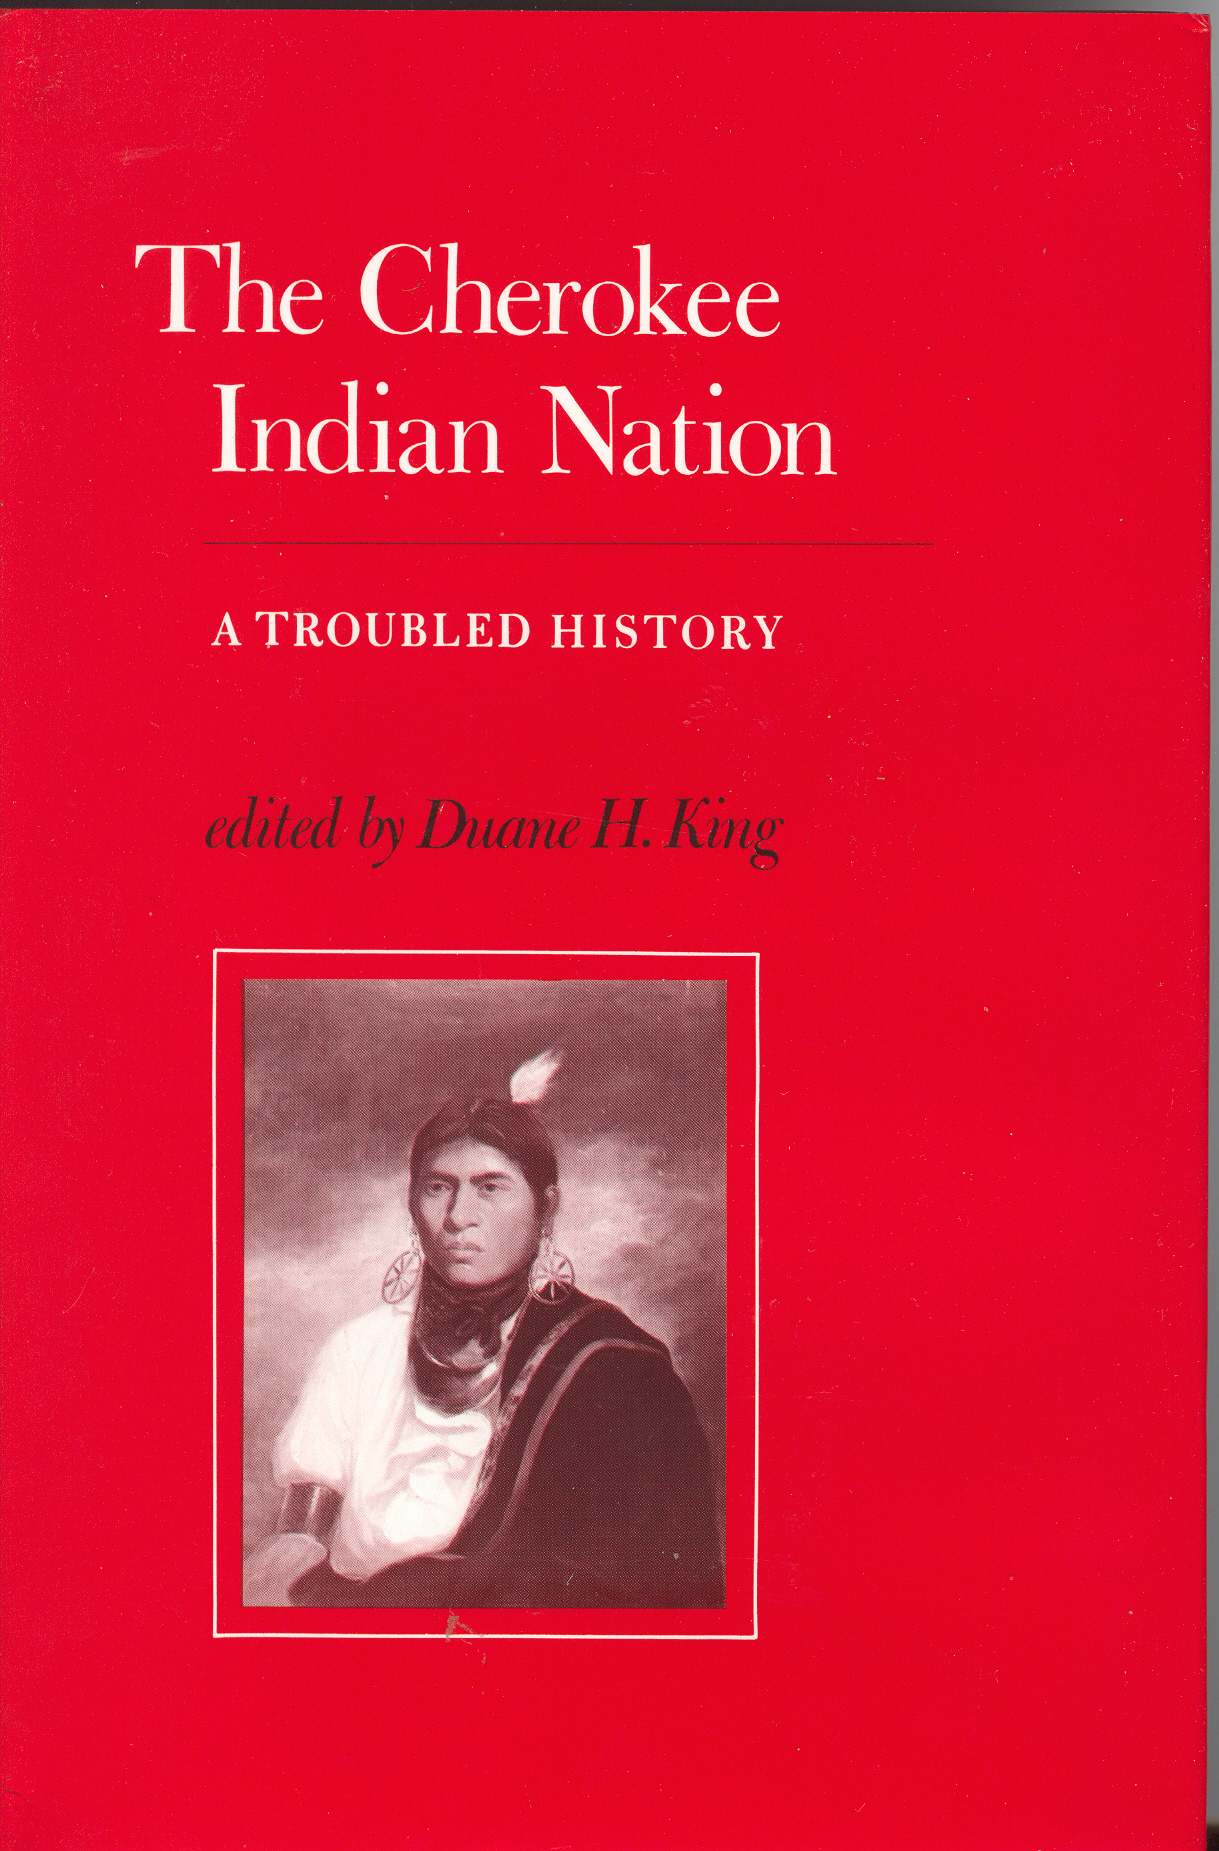 THE CHEROKEE INDIAN NATION, A Troubled History